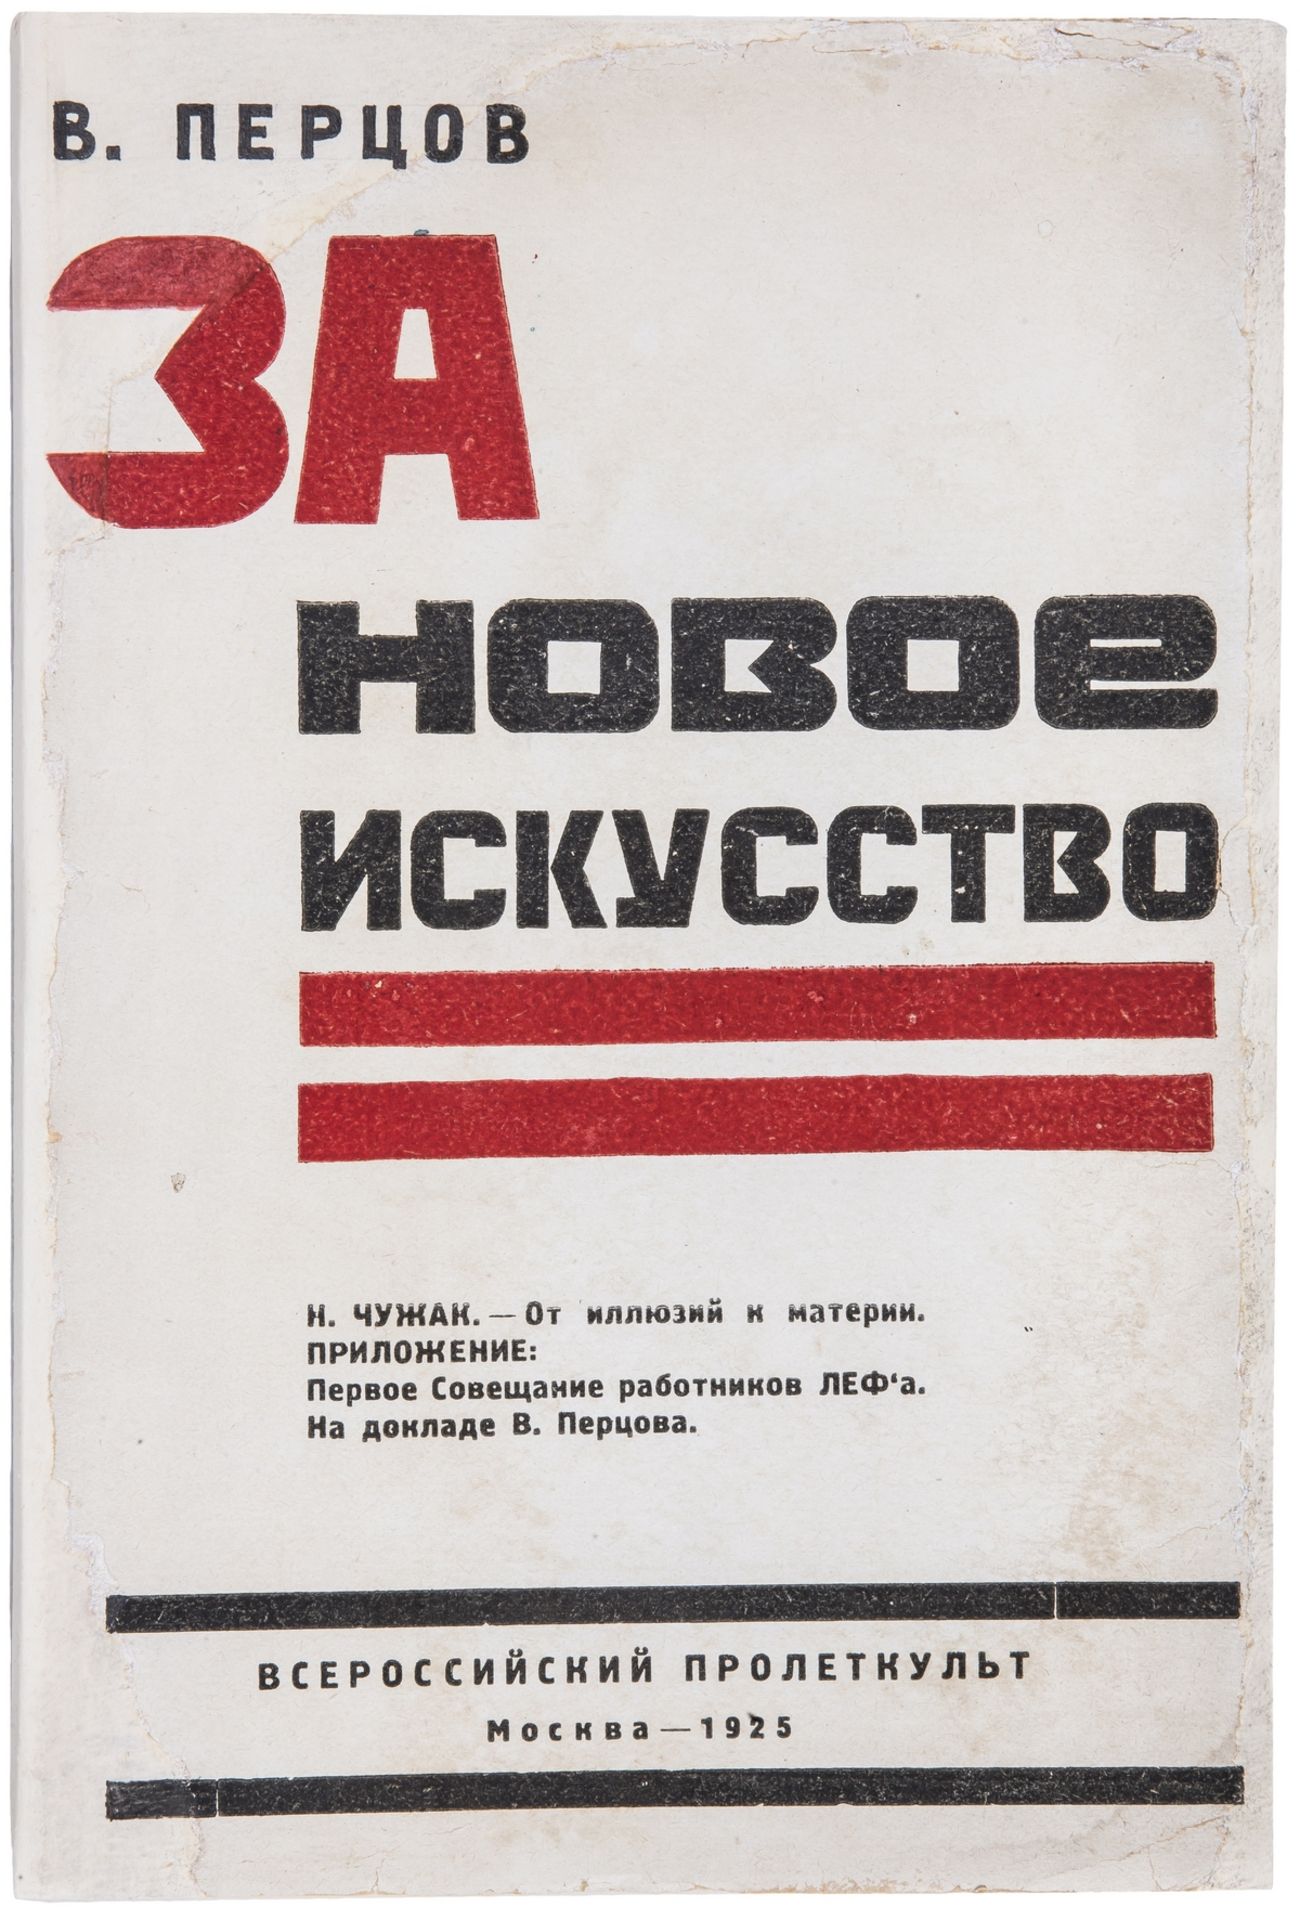 [Soviet] Pertsov, V.O. Left Front Revision In Contemporary Russian Art. From Illusion To The Matter 